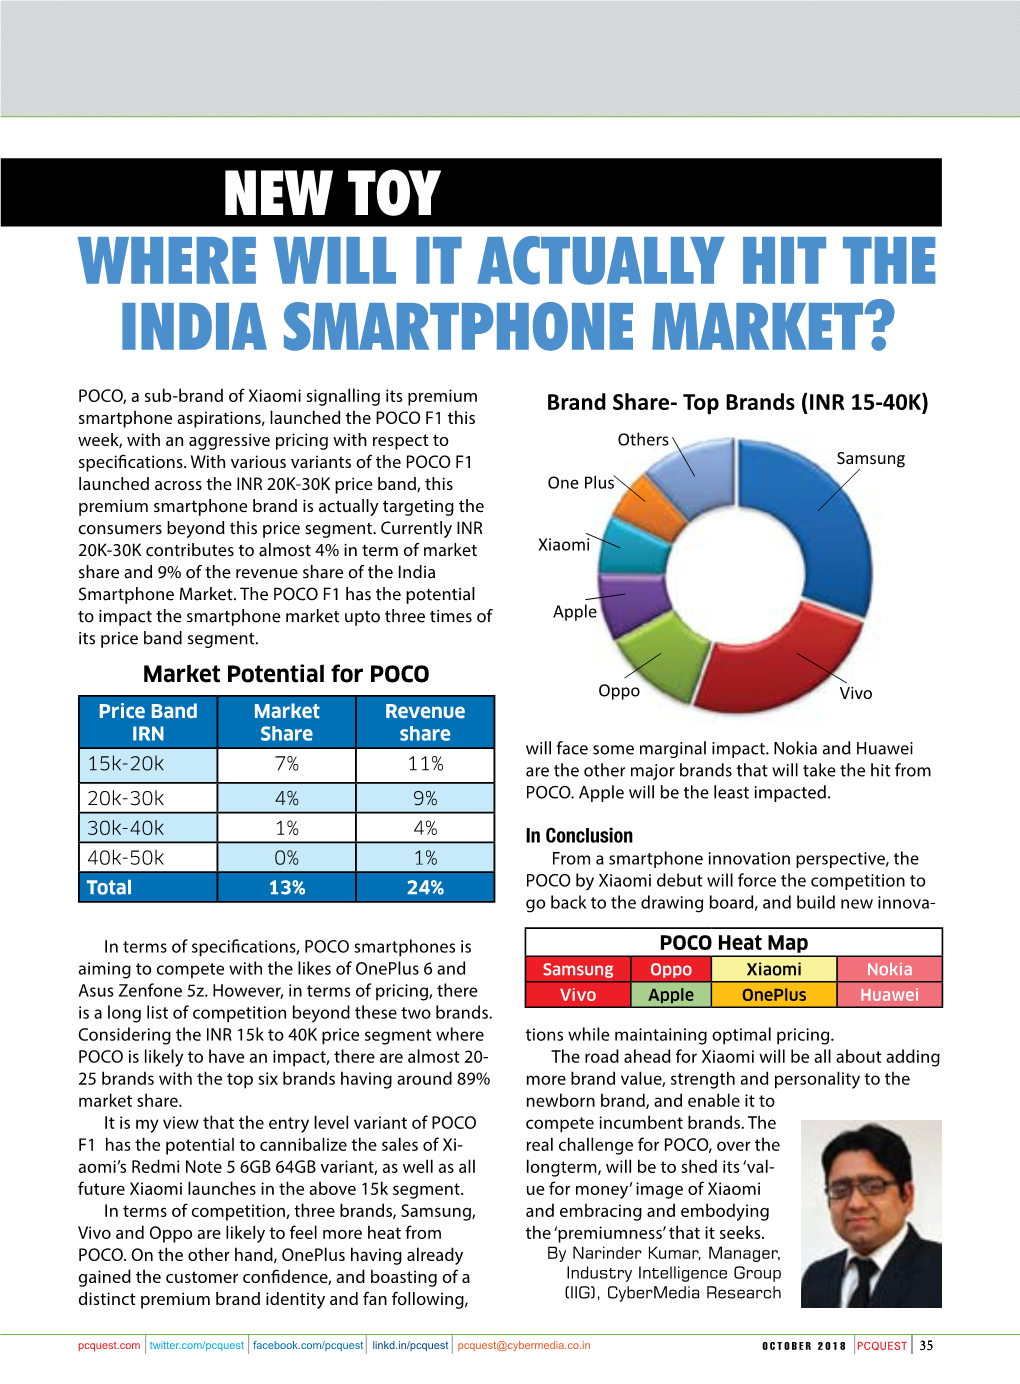 Where Will It Actually Hit the India Smartphone Market?